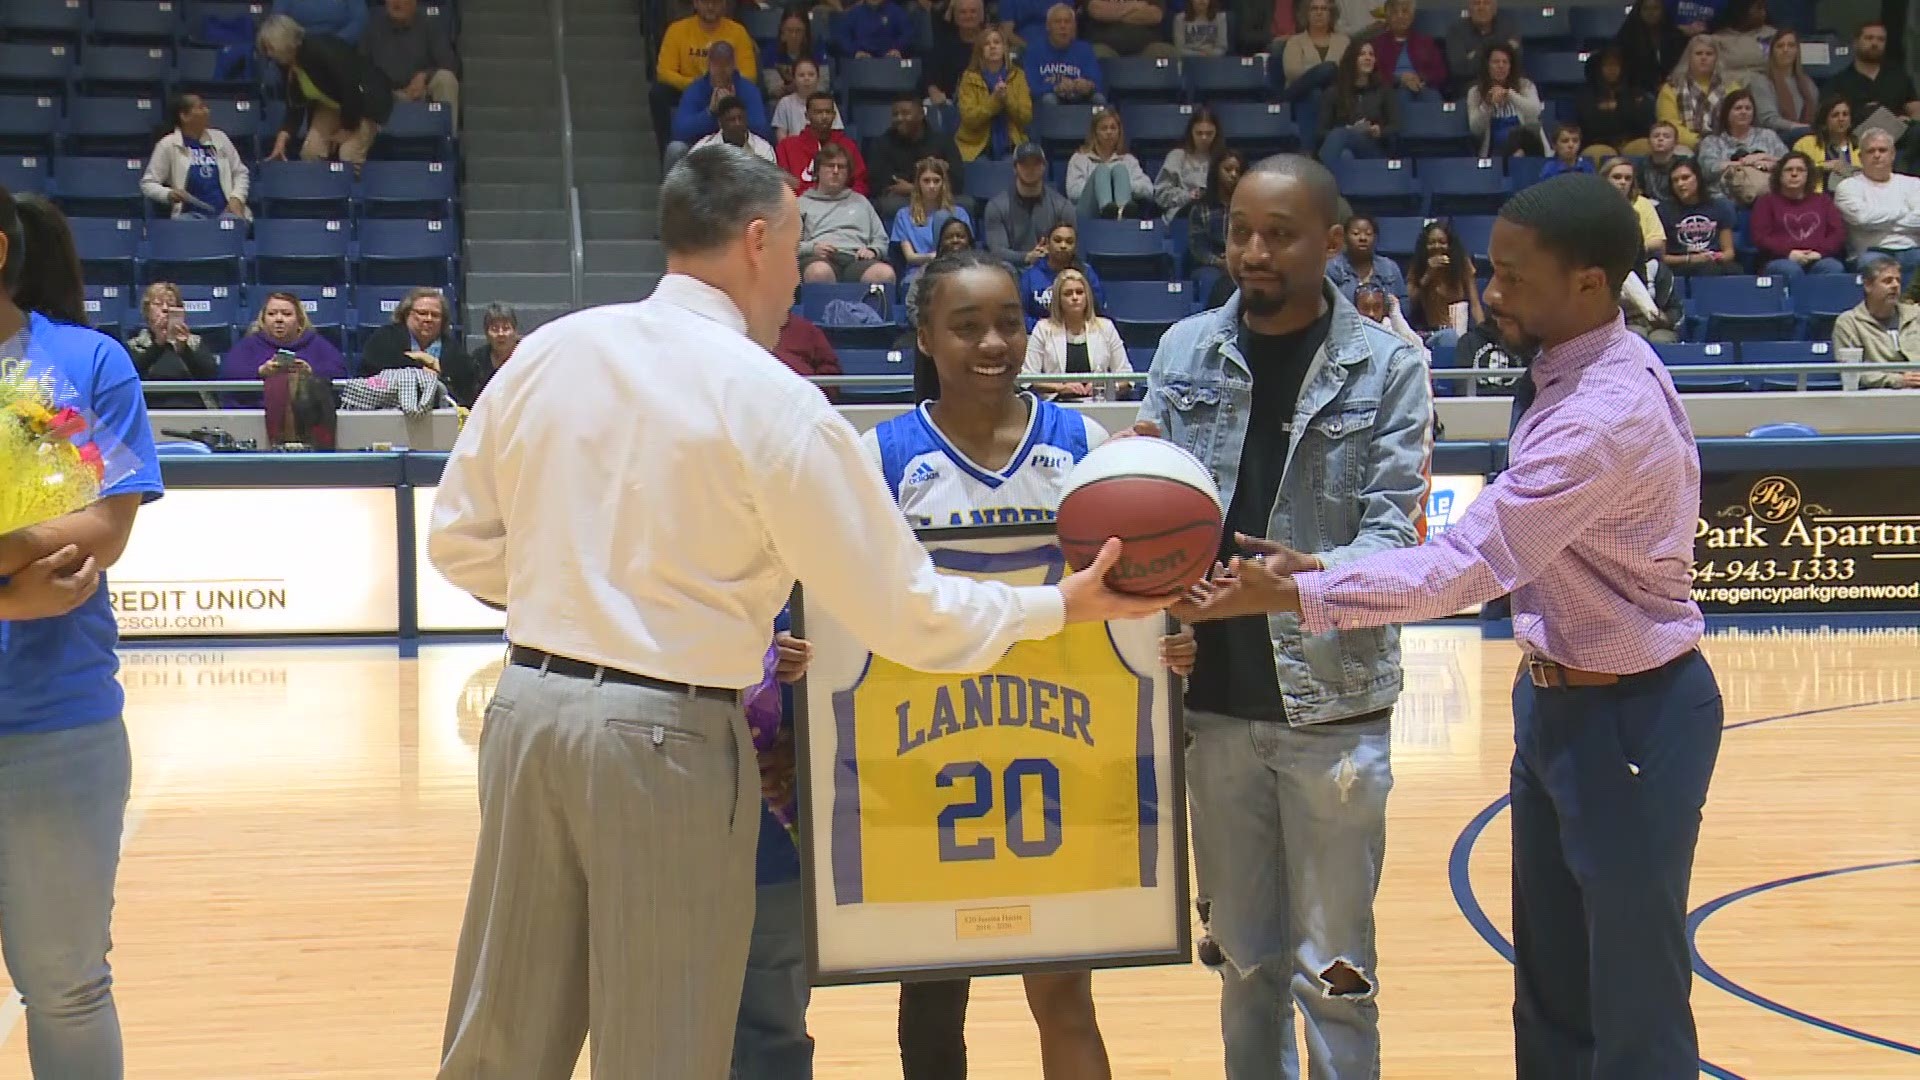 Former News19 Player of the Week Jessica Harris out of Sumter has played her final regular season home game at Lander University.